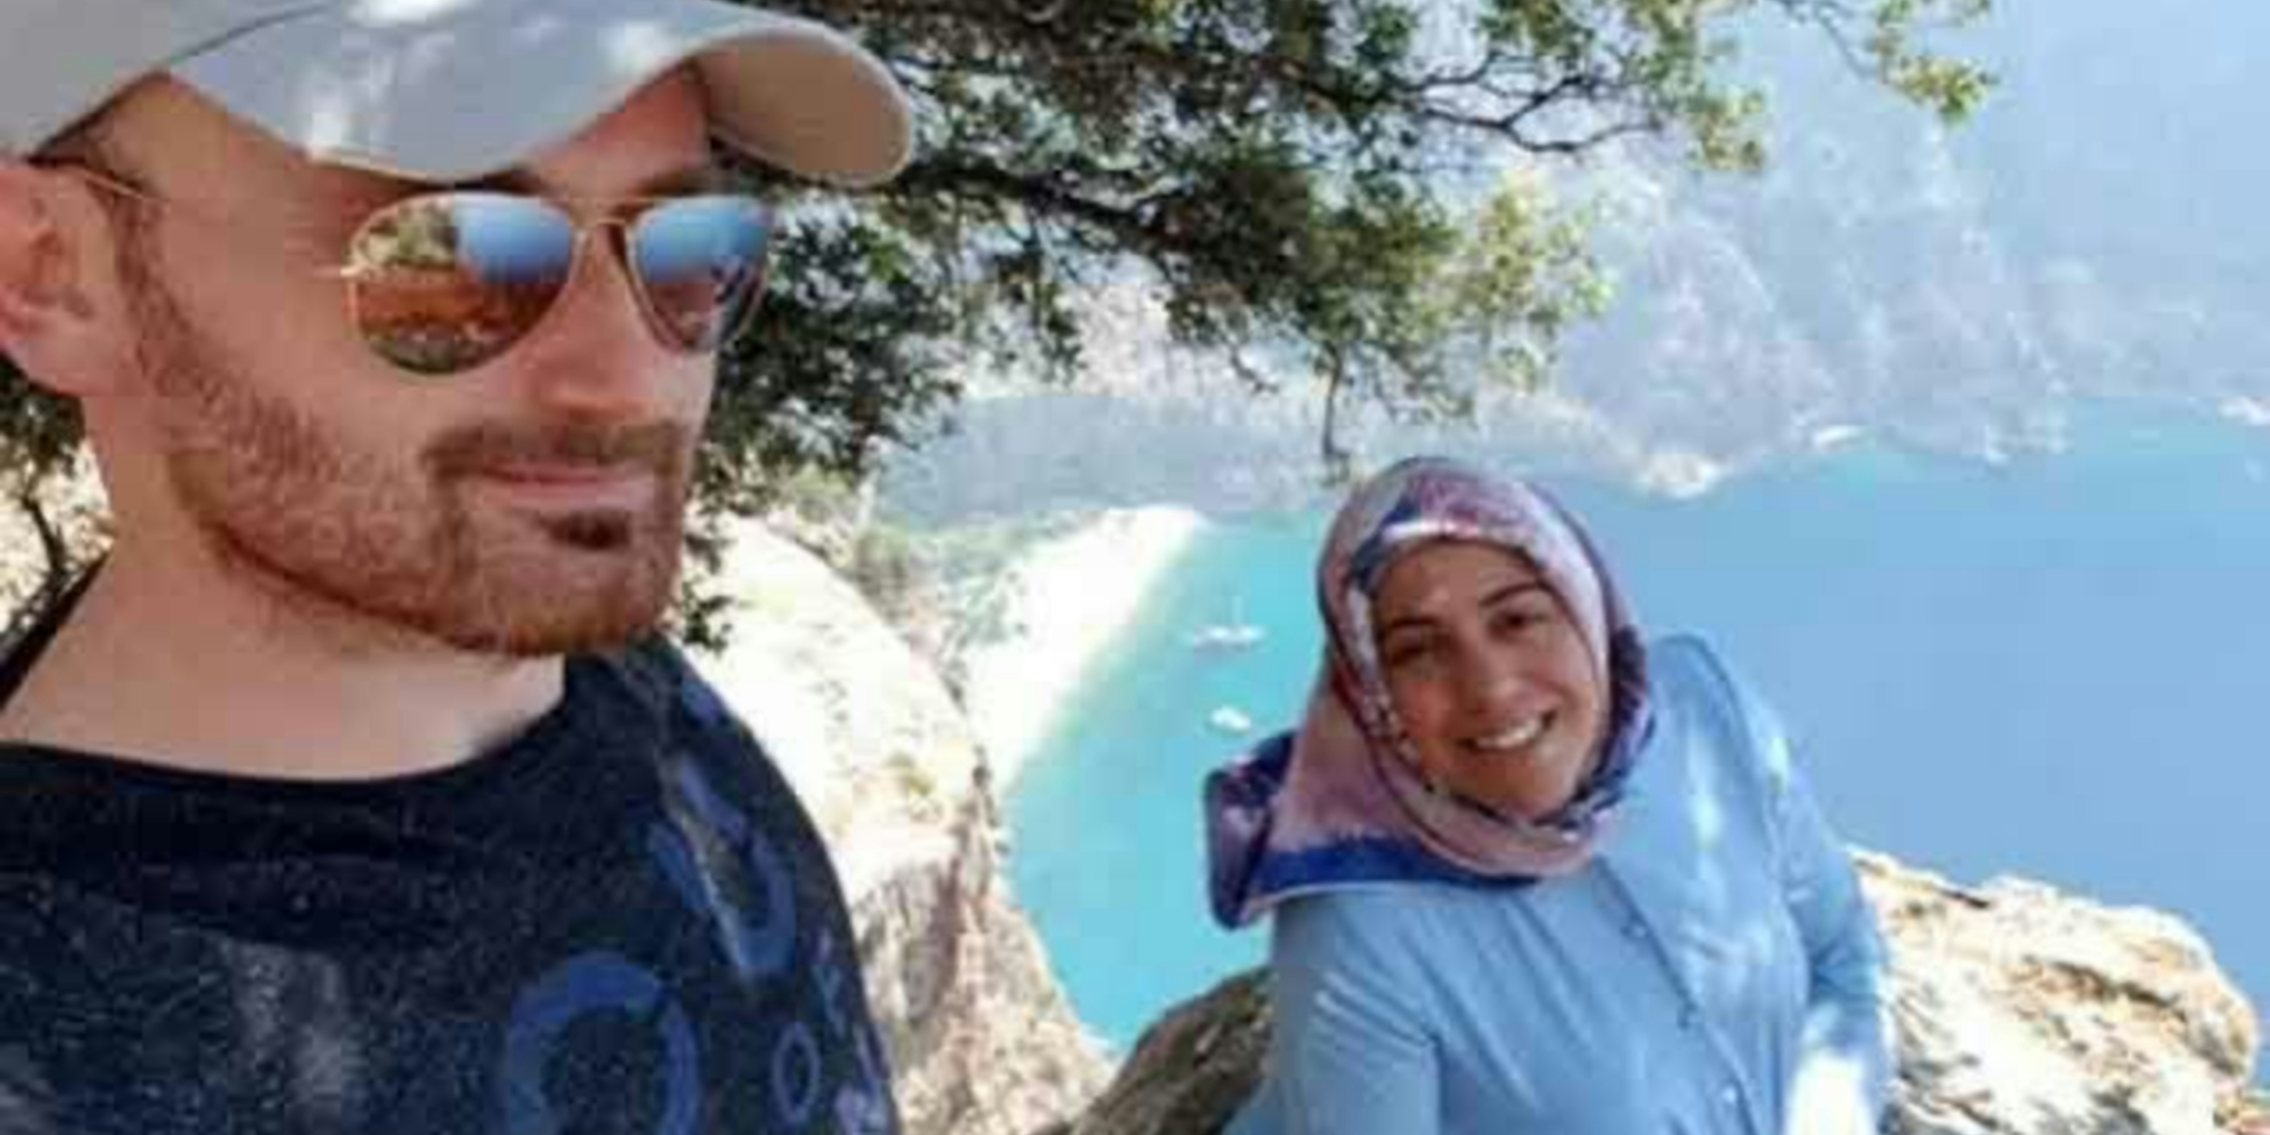 semra aysal and her husband Hakan Aysal right before he allegedly pushed her off cliff